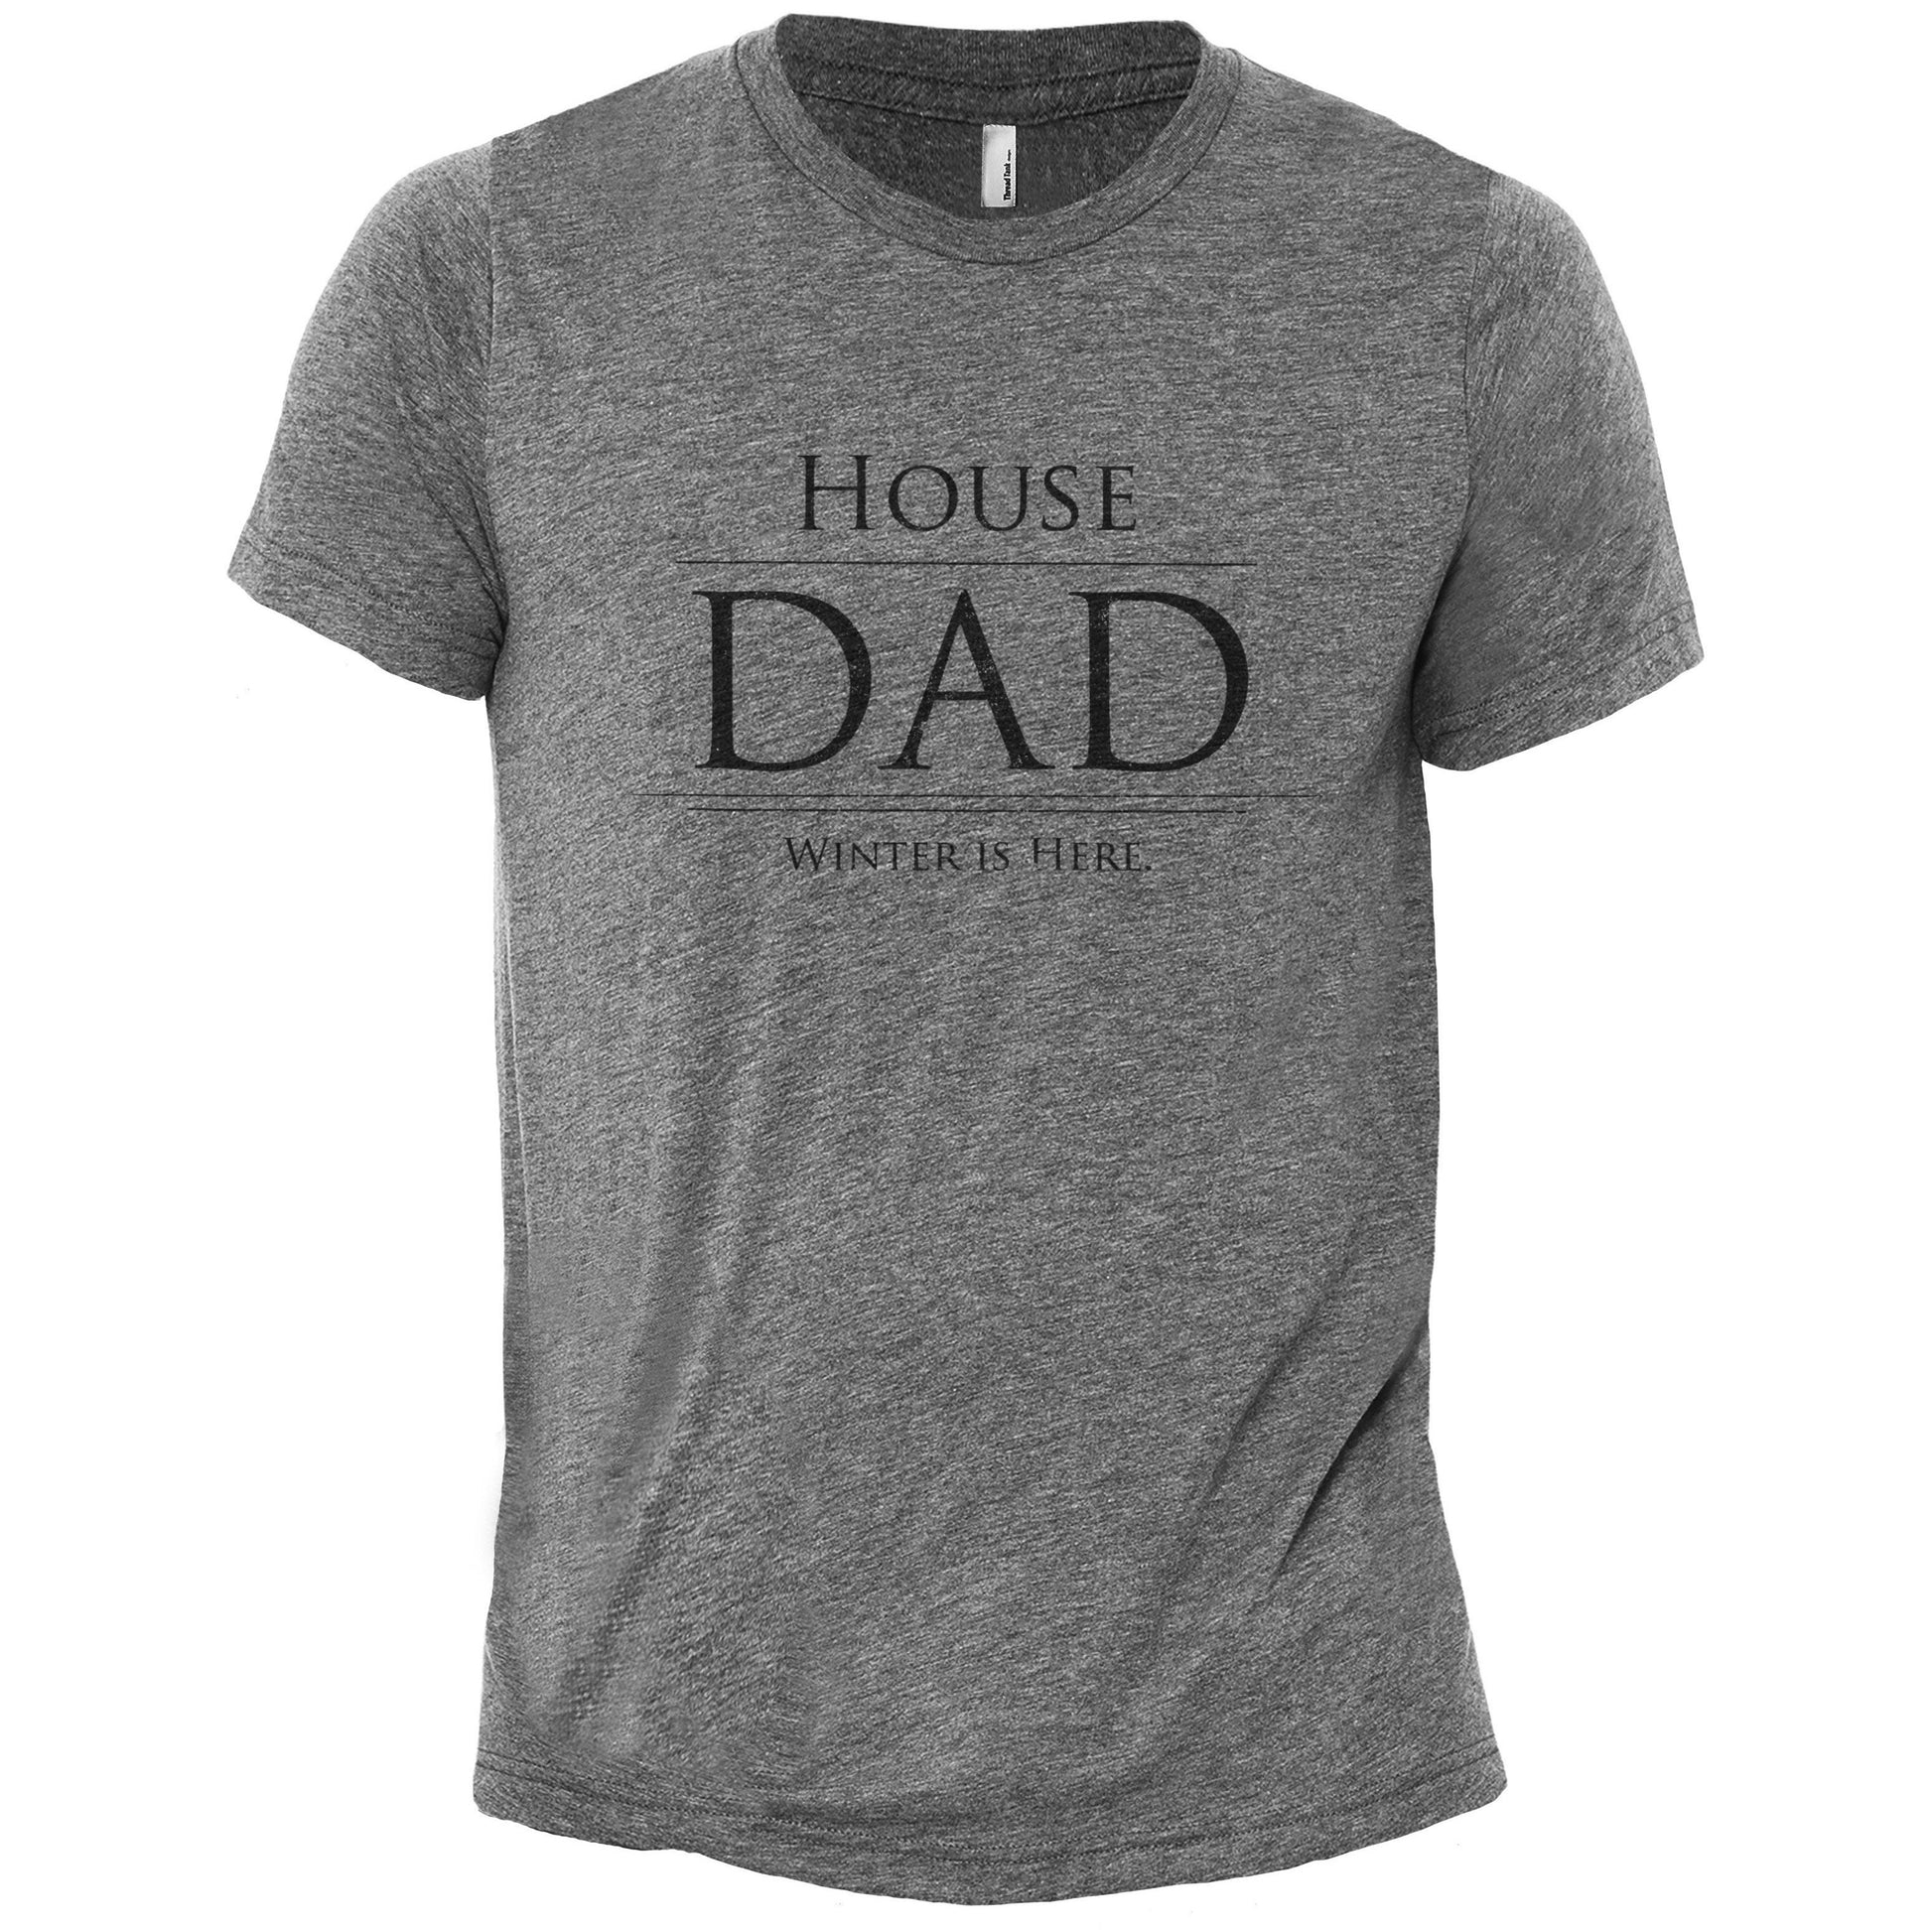 House Dad Winter Is Here Heather Grey Printed Graphic Men's Crew T-Shirt Tee